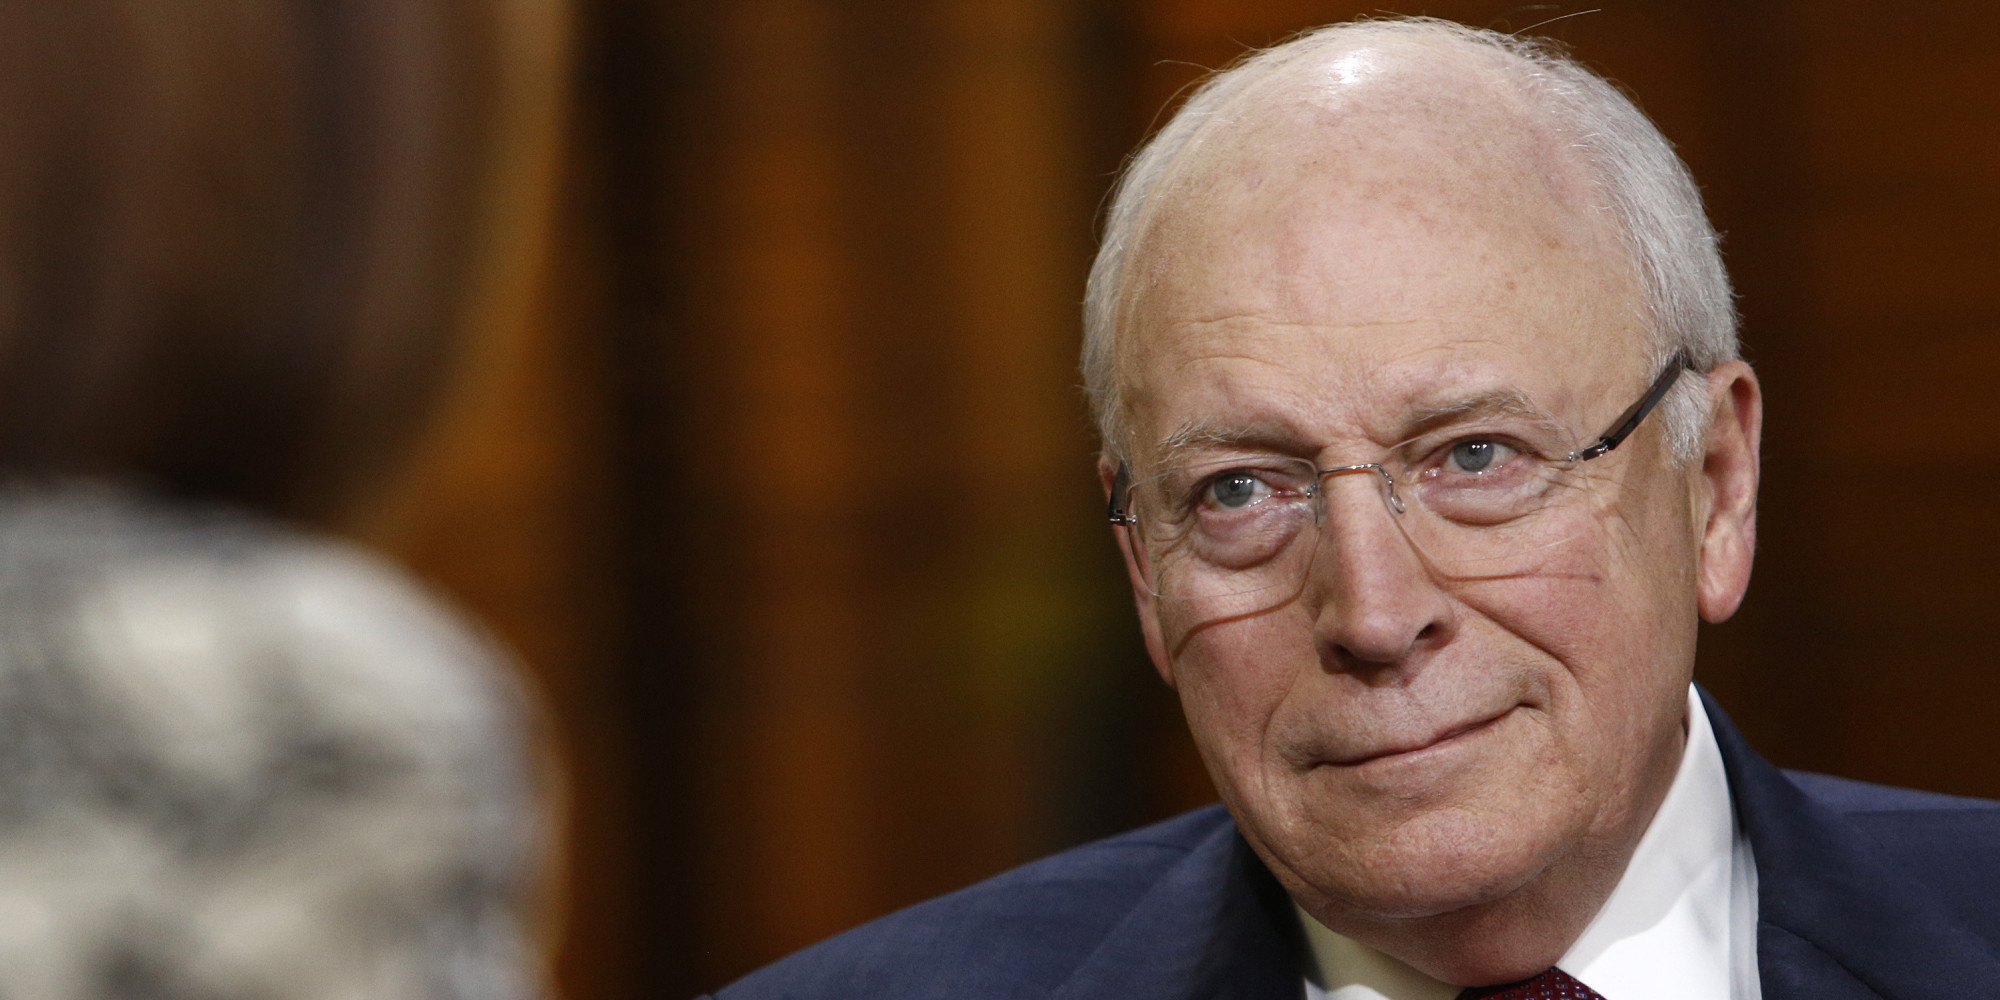 Dick cheney interview youtube